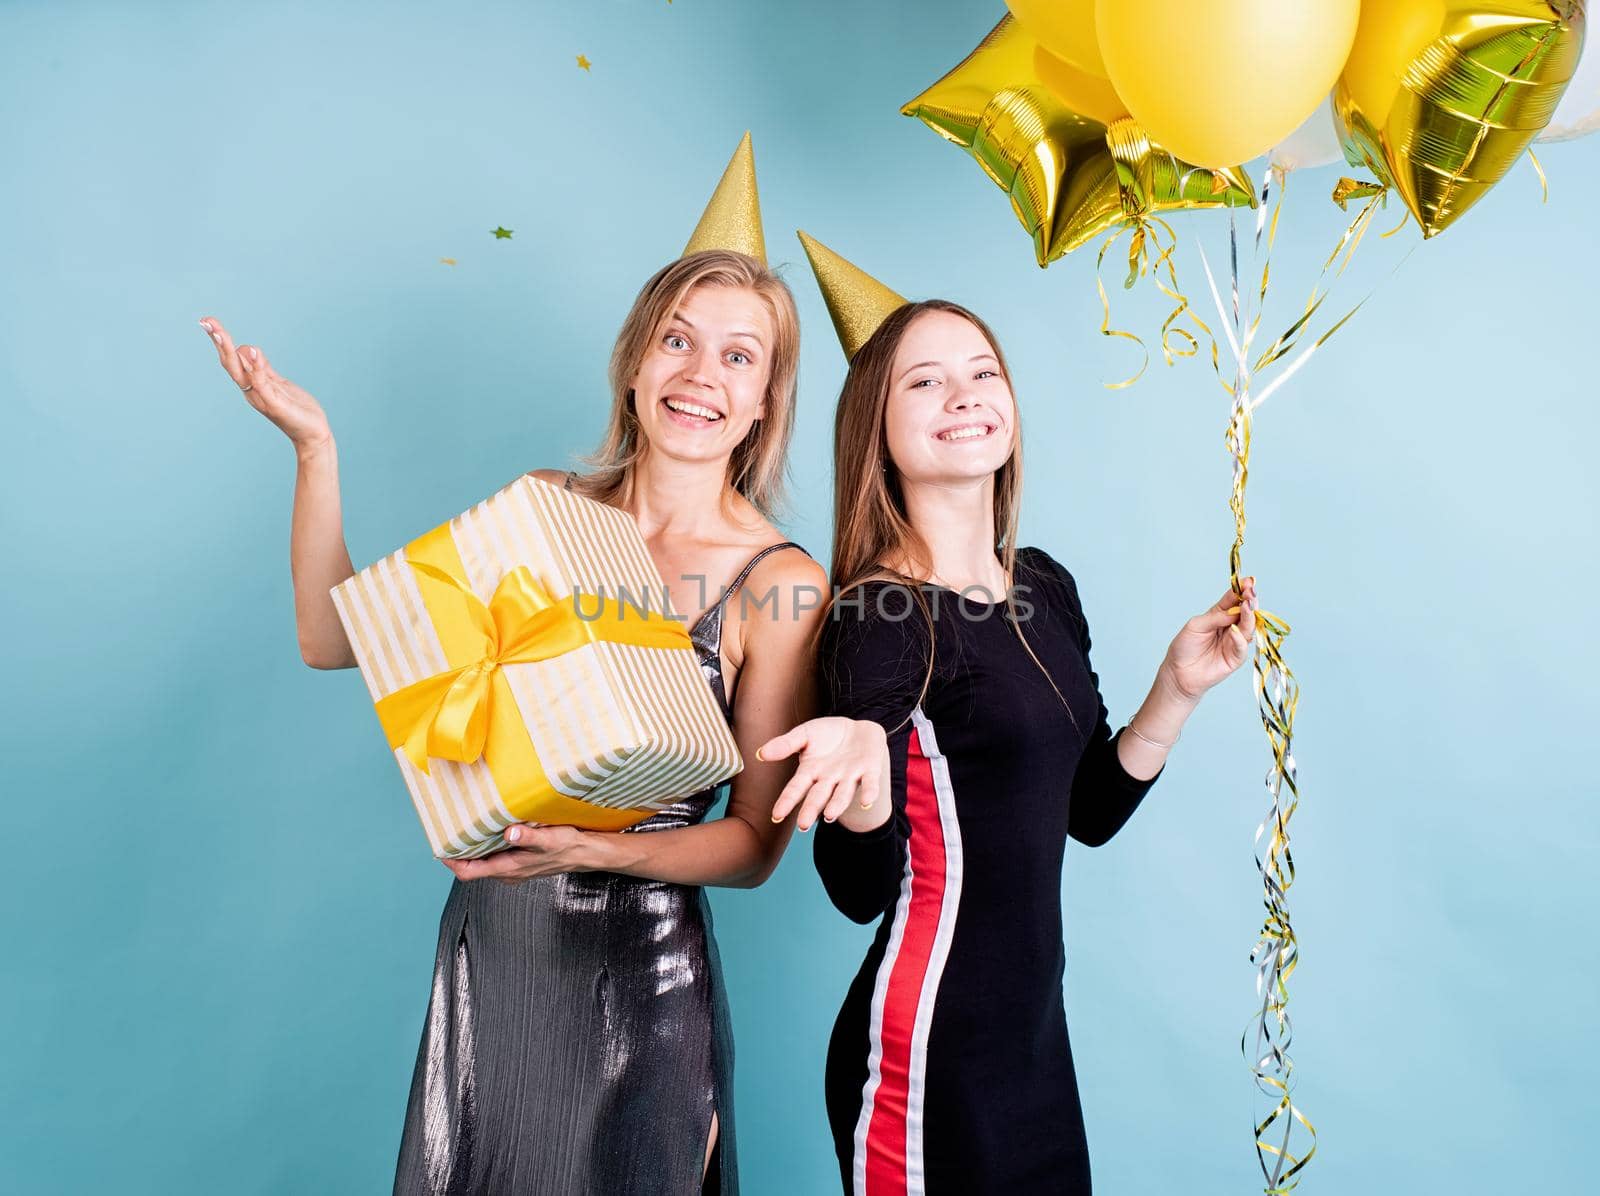 Two young women in birthday hats holding balloons celebrating birthday over blue background by Desperada